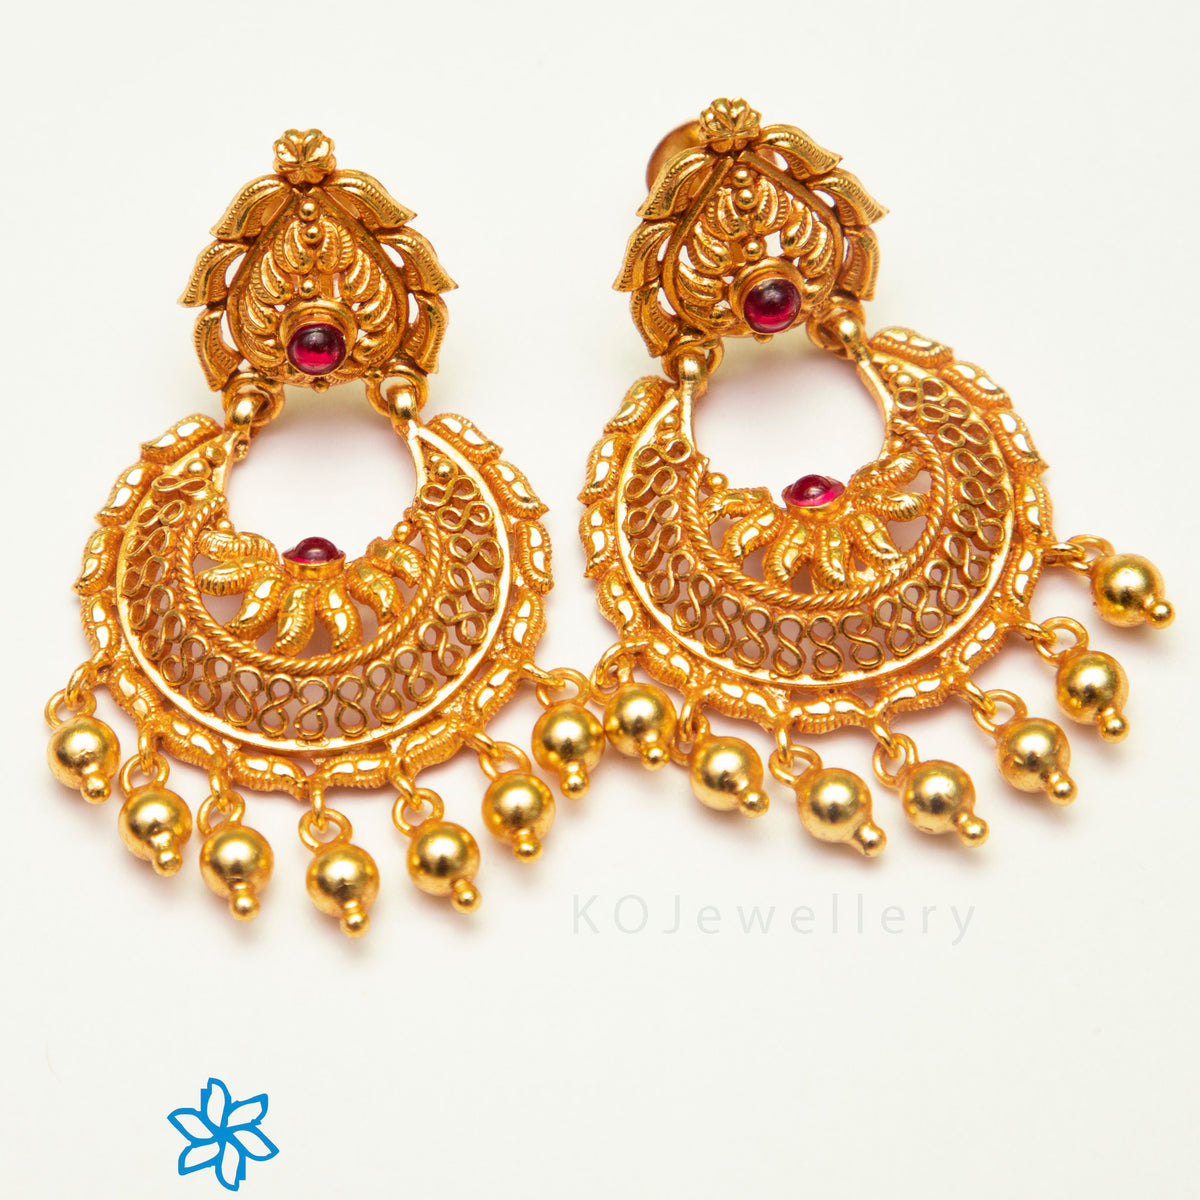 File:Pair of earrings, northern India, 19th century, gold, pearls and clear  stones, Honolulu Academy of Arts.JPG - Wikimedia Commons